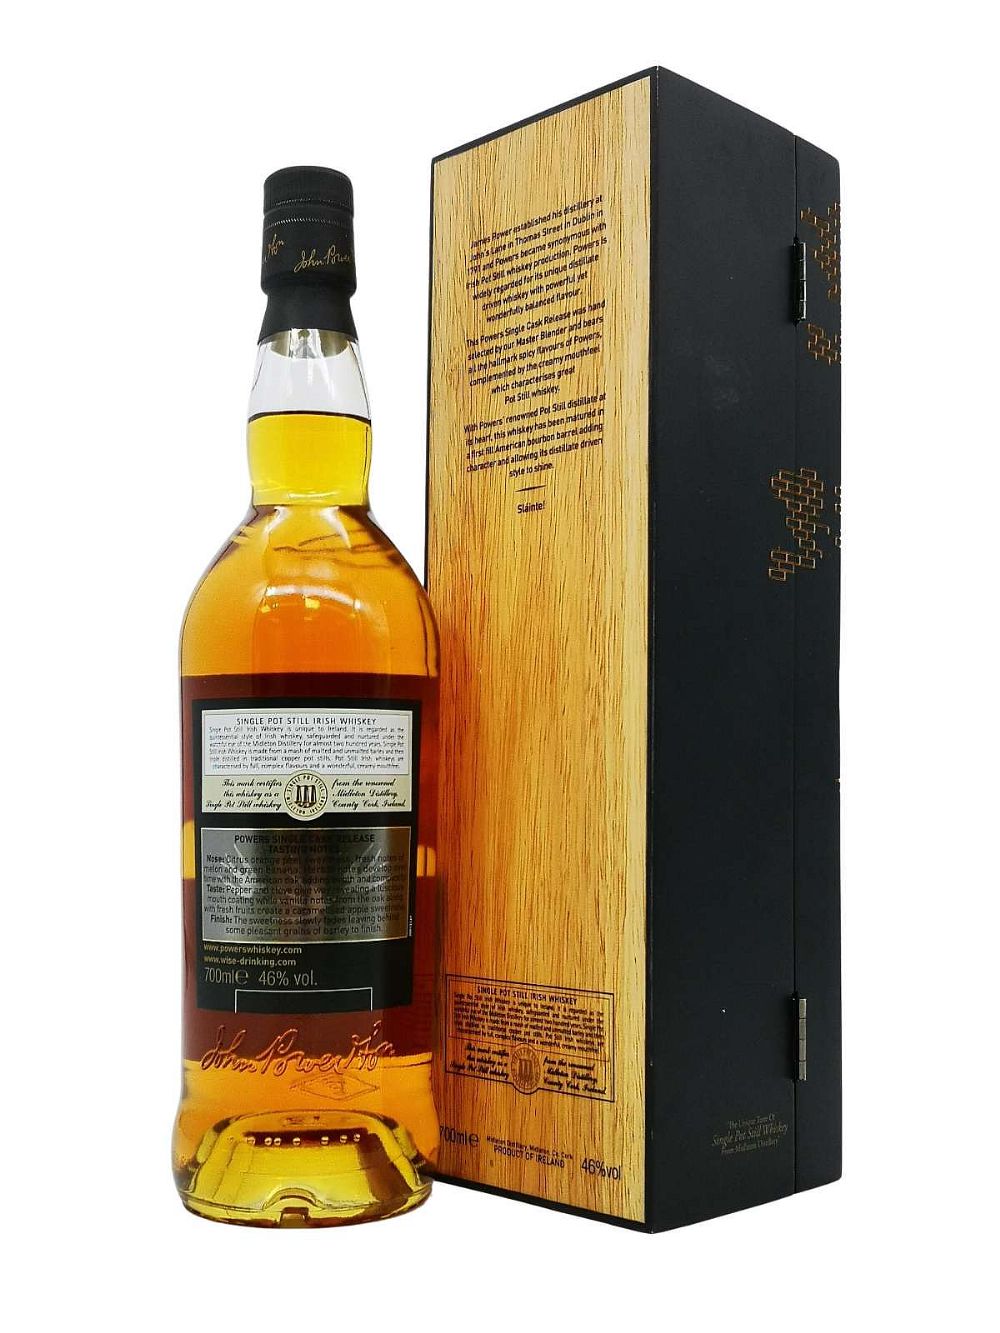 Powers Single Cask 15 year old, SuperValu exclusive, Cask no. 69915